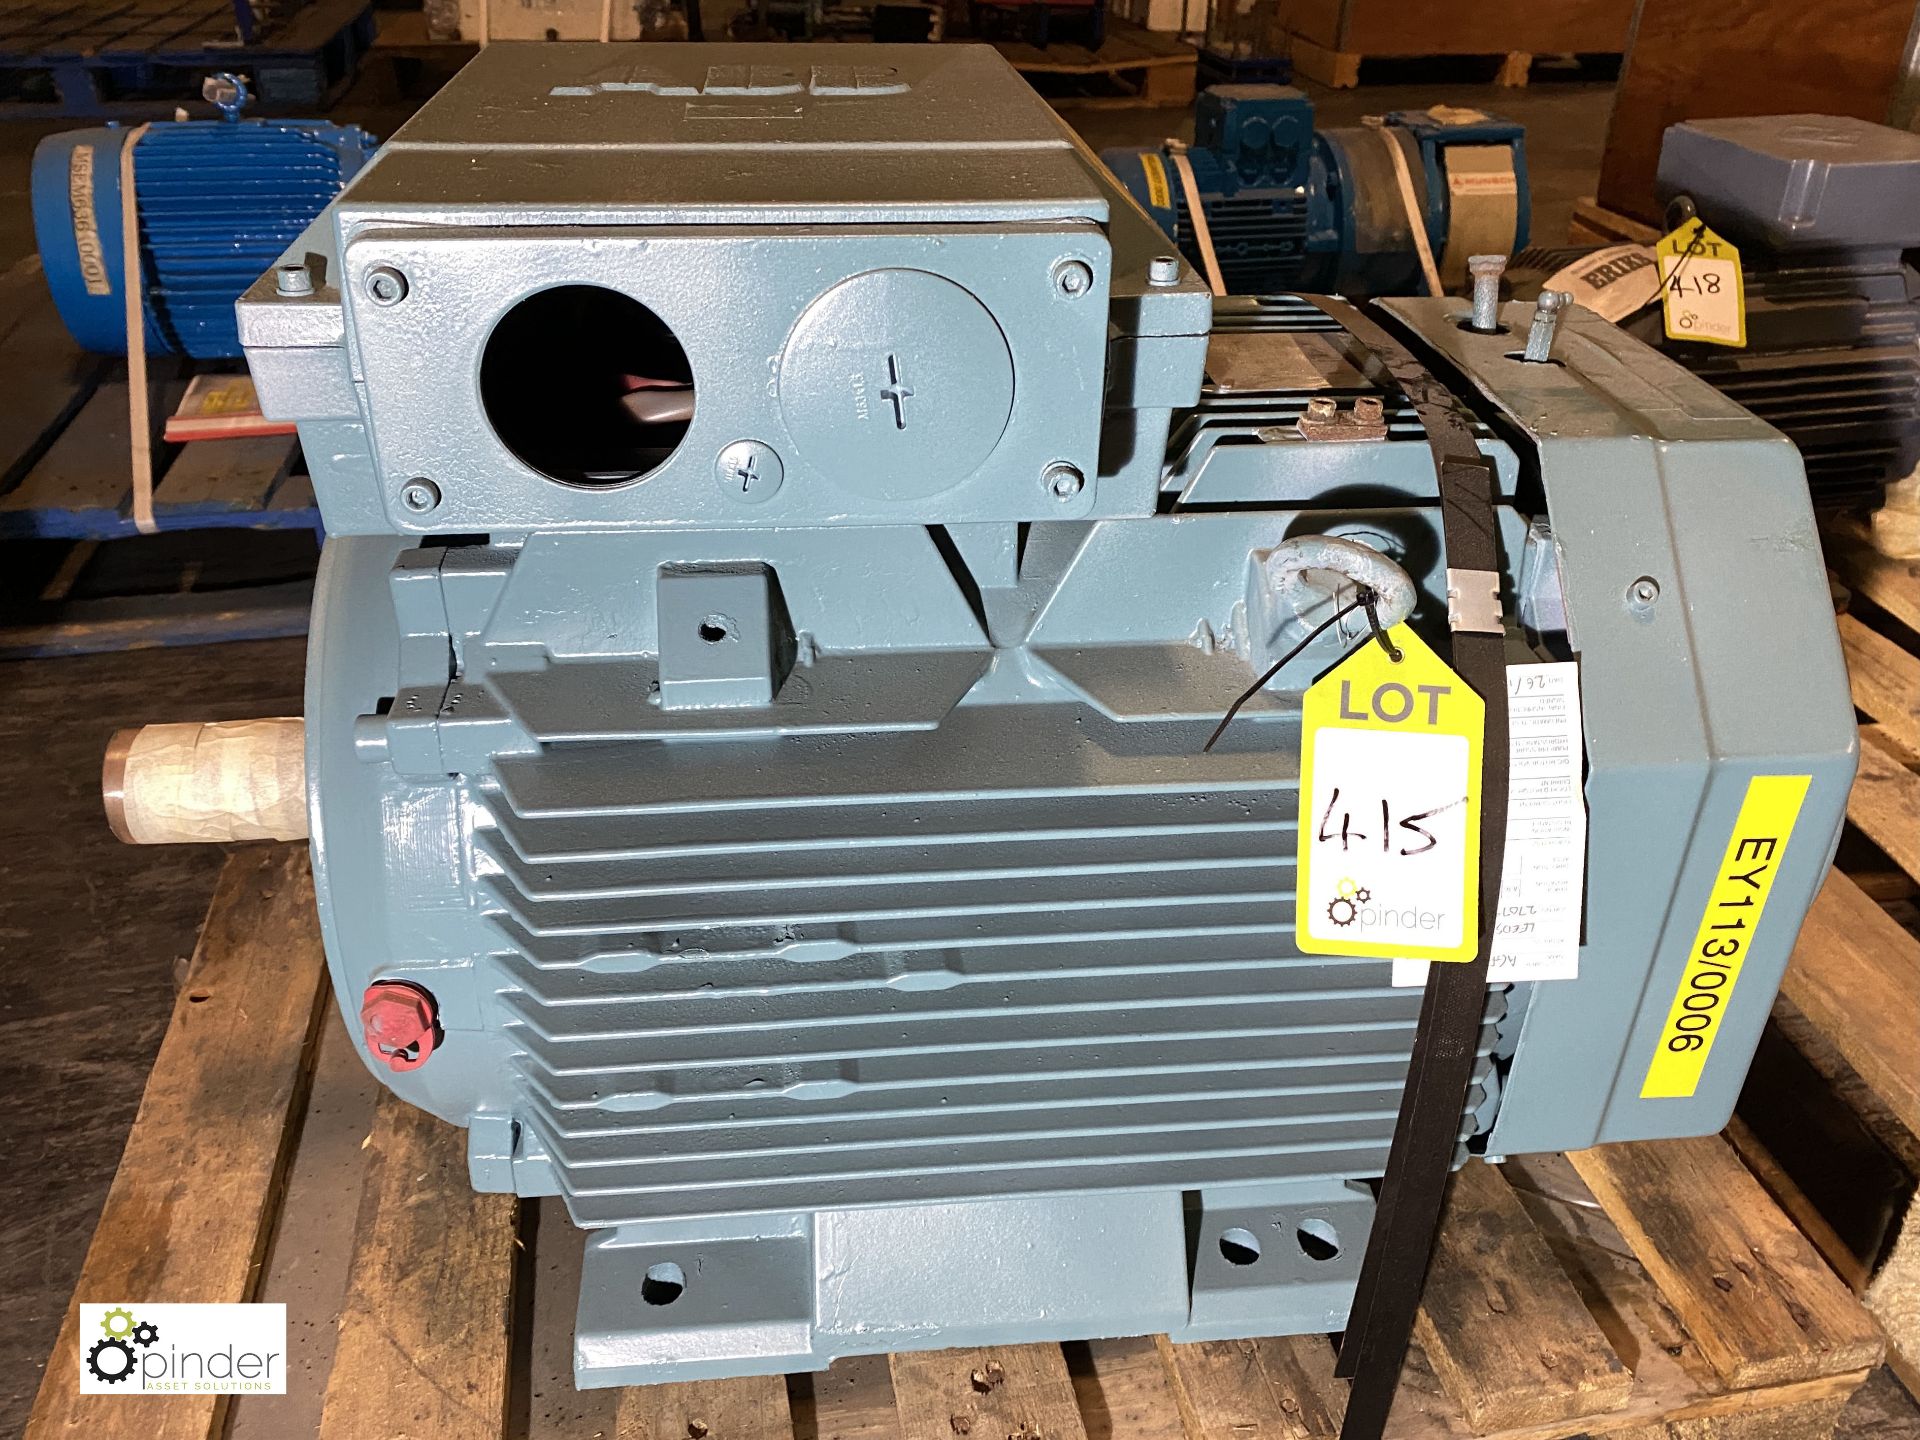 ABB M3BP 200 ML A2 Electric Motor, 30kw, 2960rpm, IP55, 3ph, Year 11/2018 (EY113) (please note there